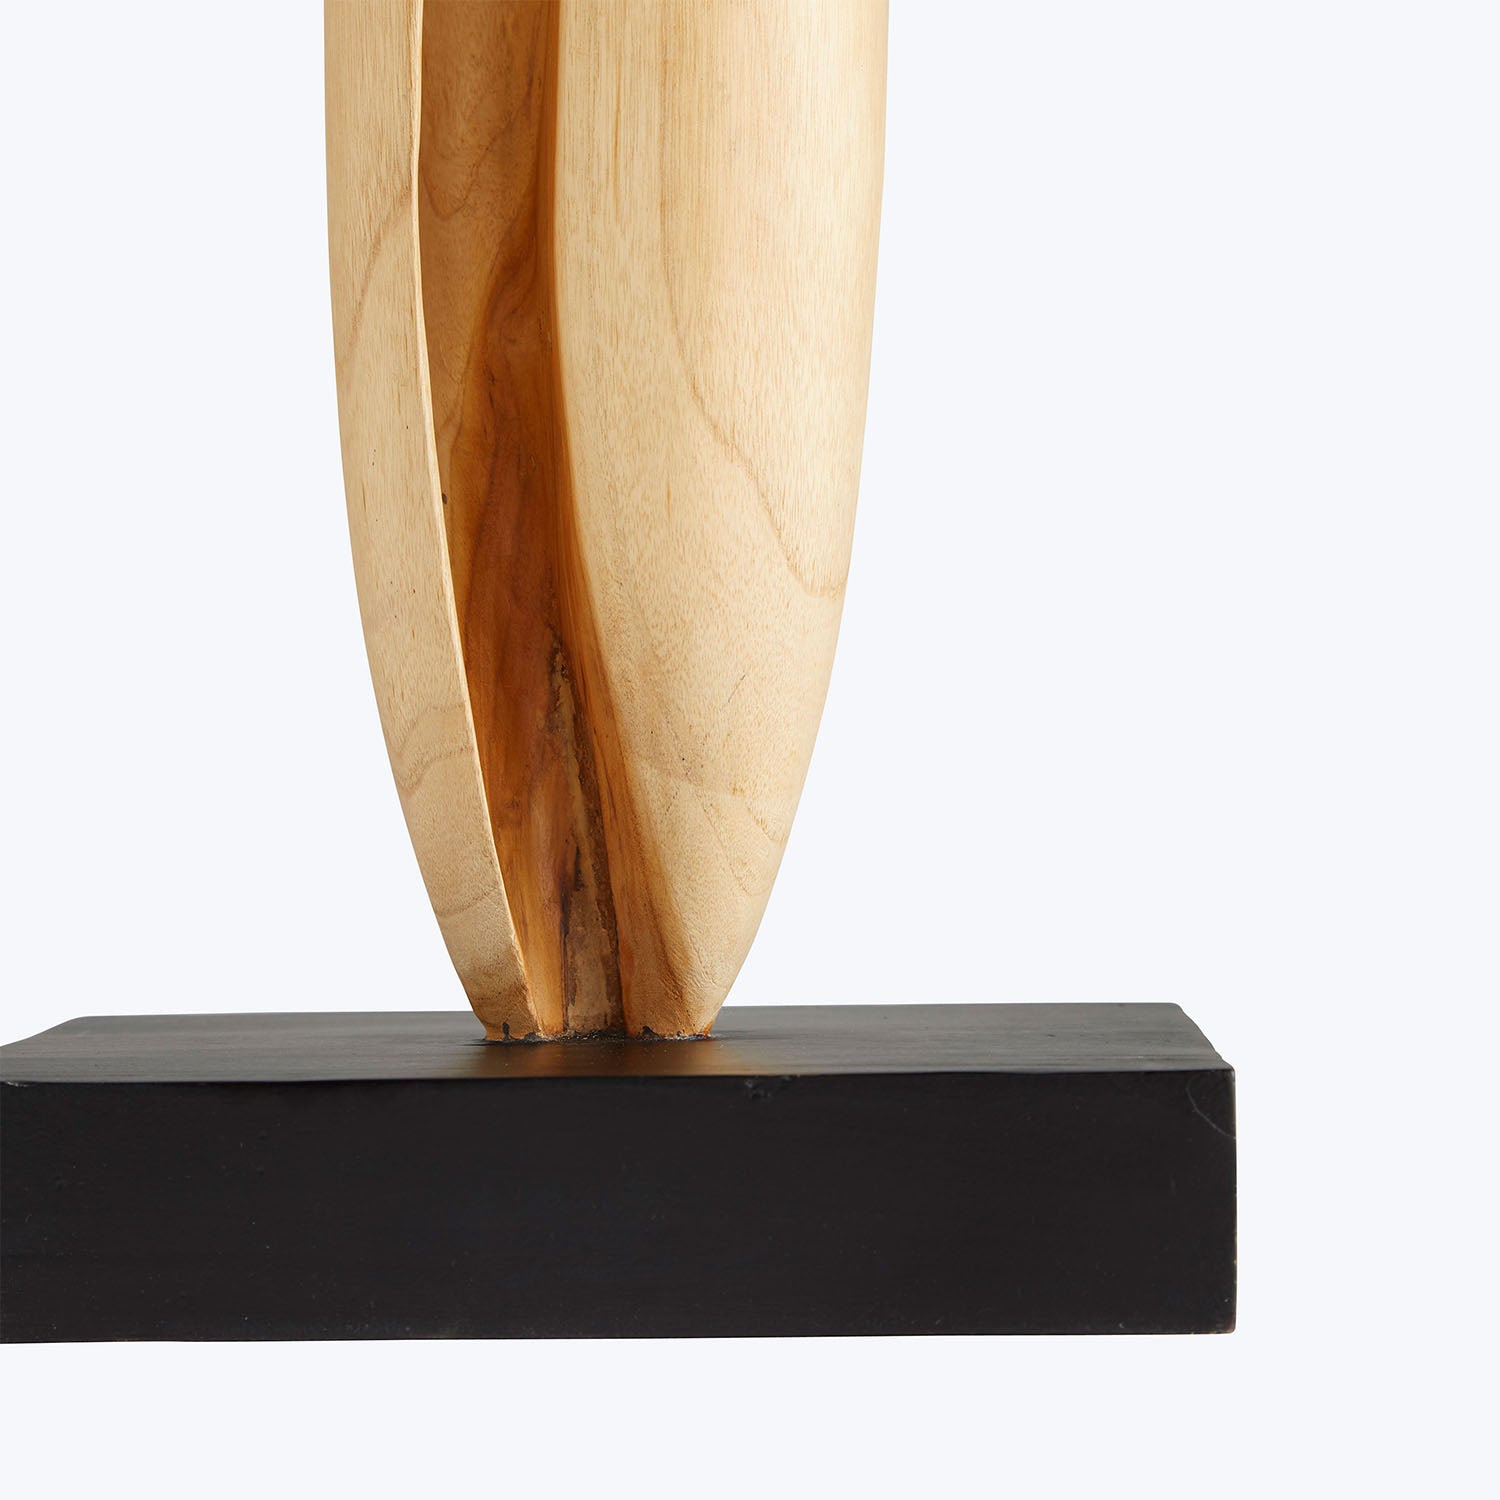 Close-up of a beautifully carved wooden sculpture on black base.